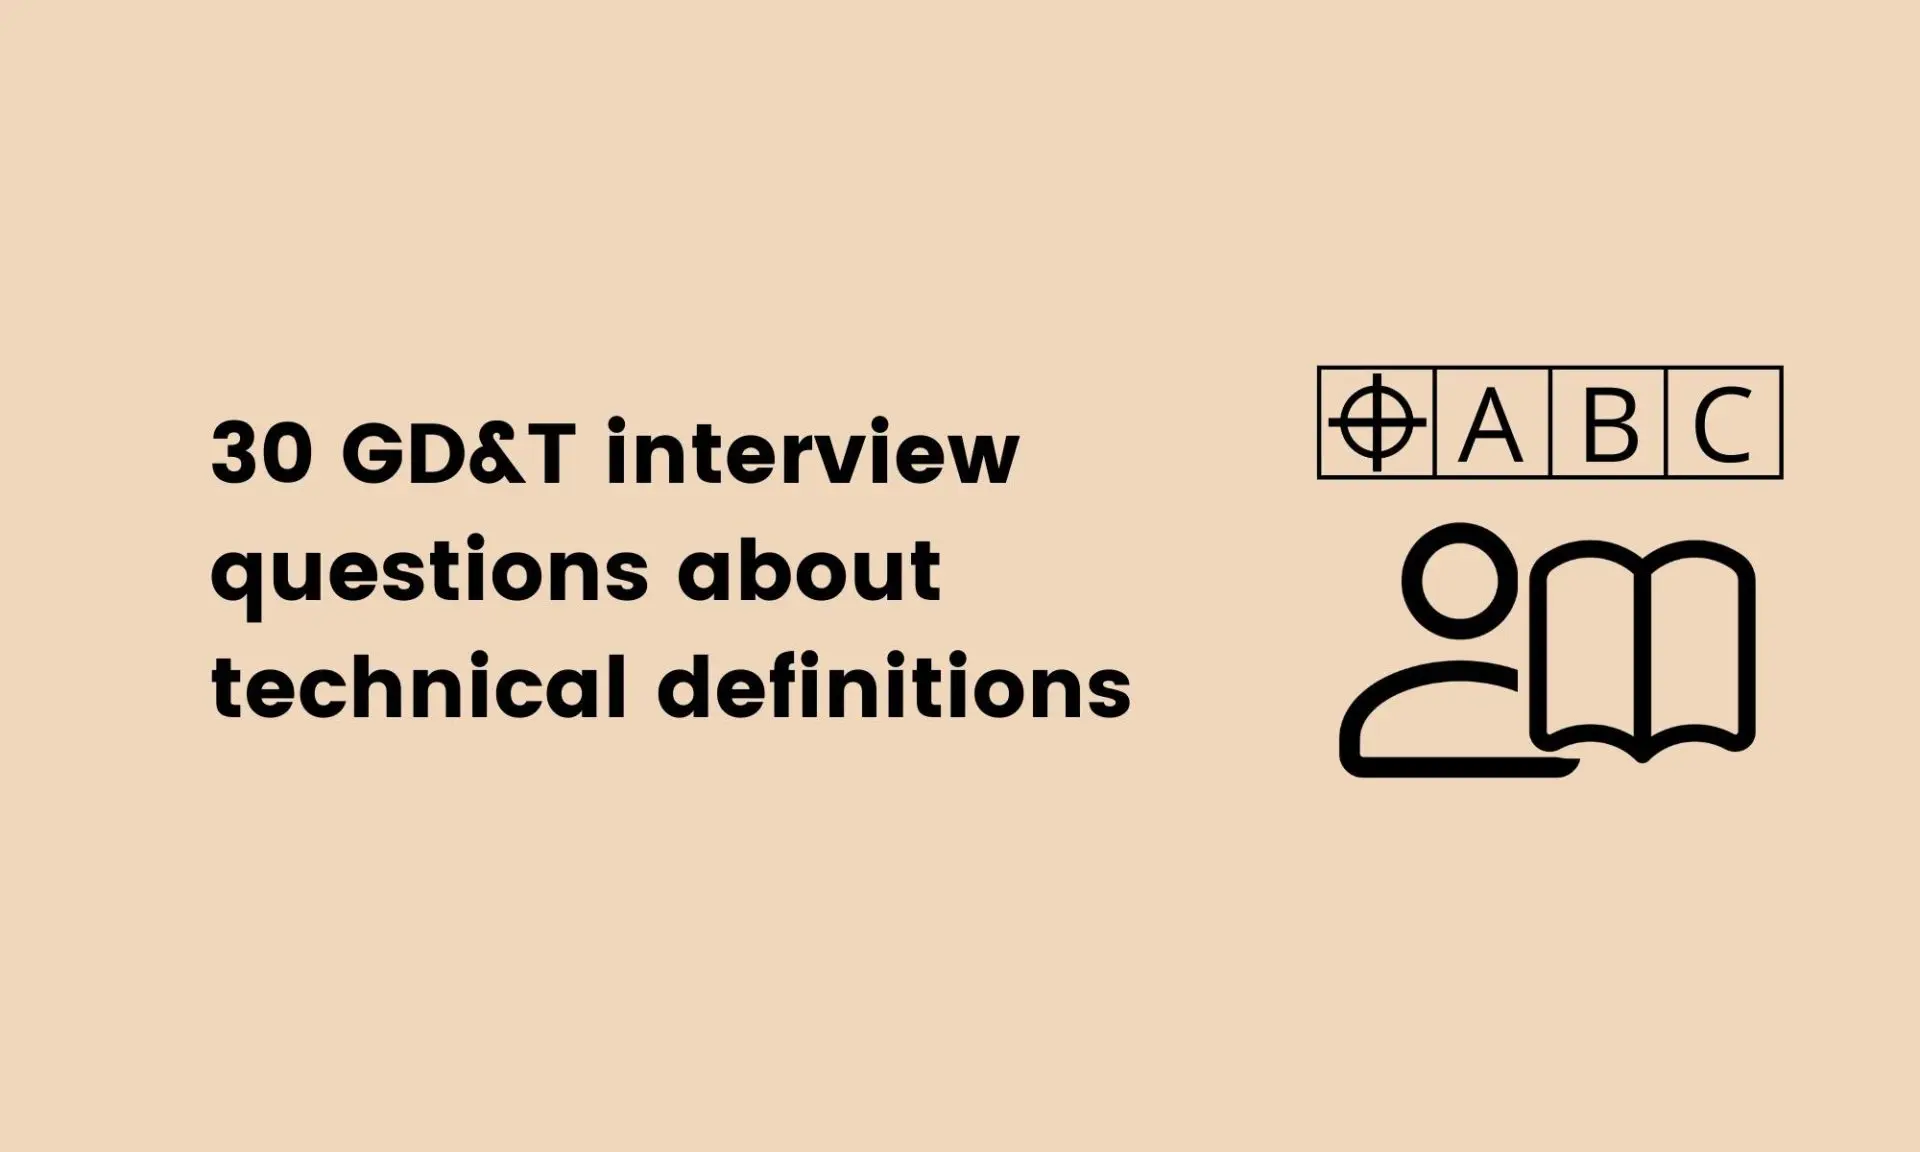 30 GD&T interview questions about technical definitions